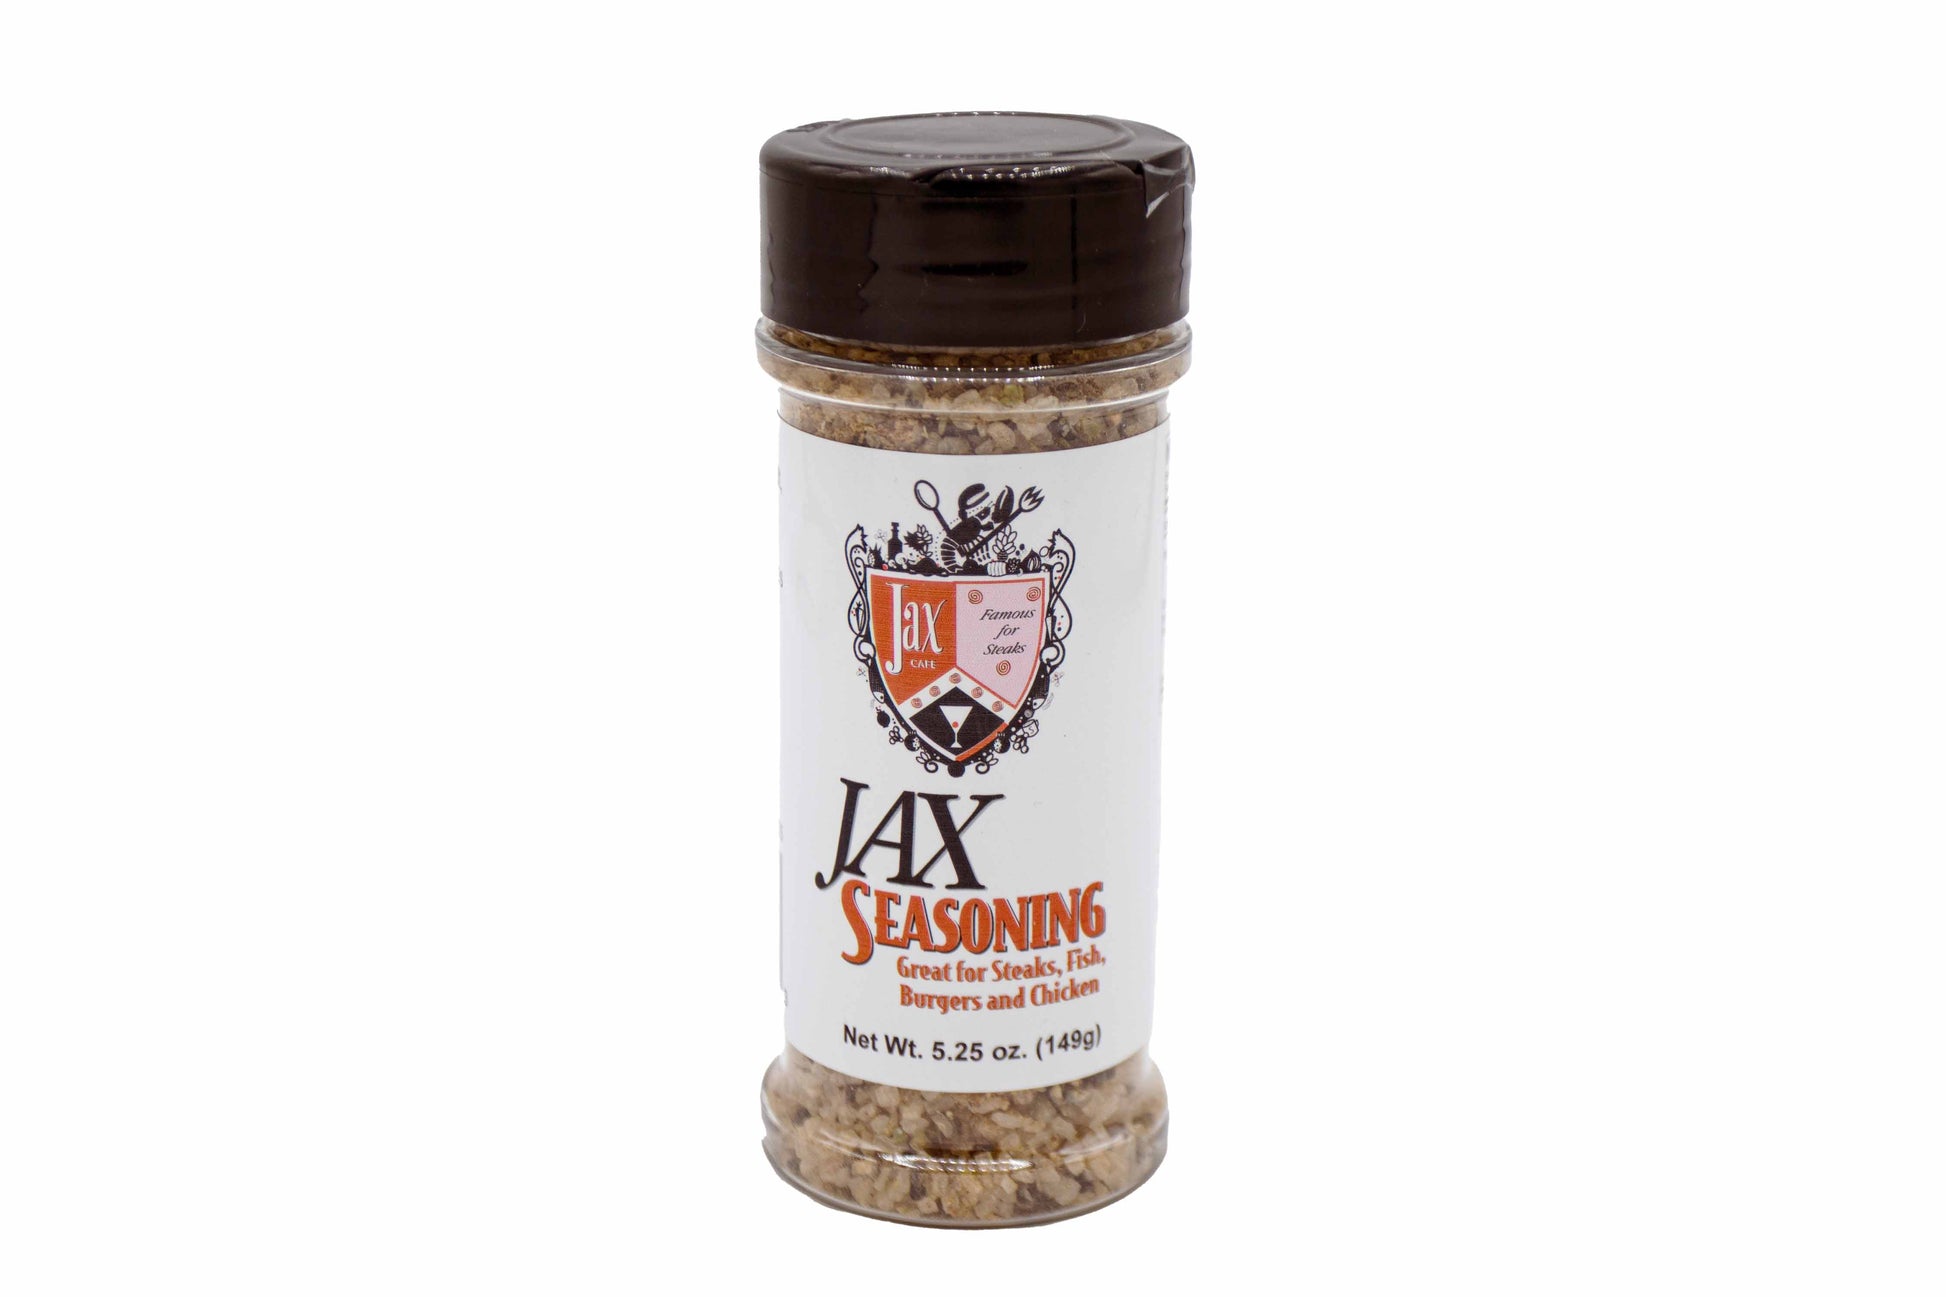 Jax Seasoing great for steaks, fish, burgers, and chicken